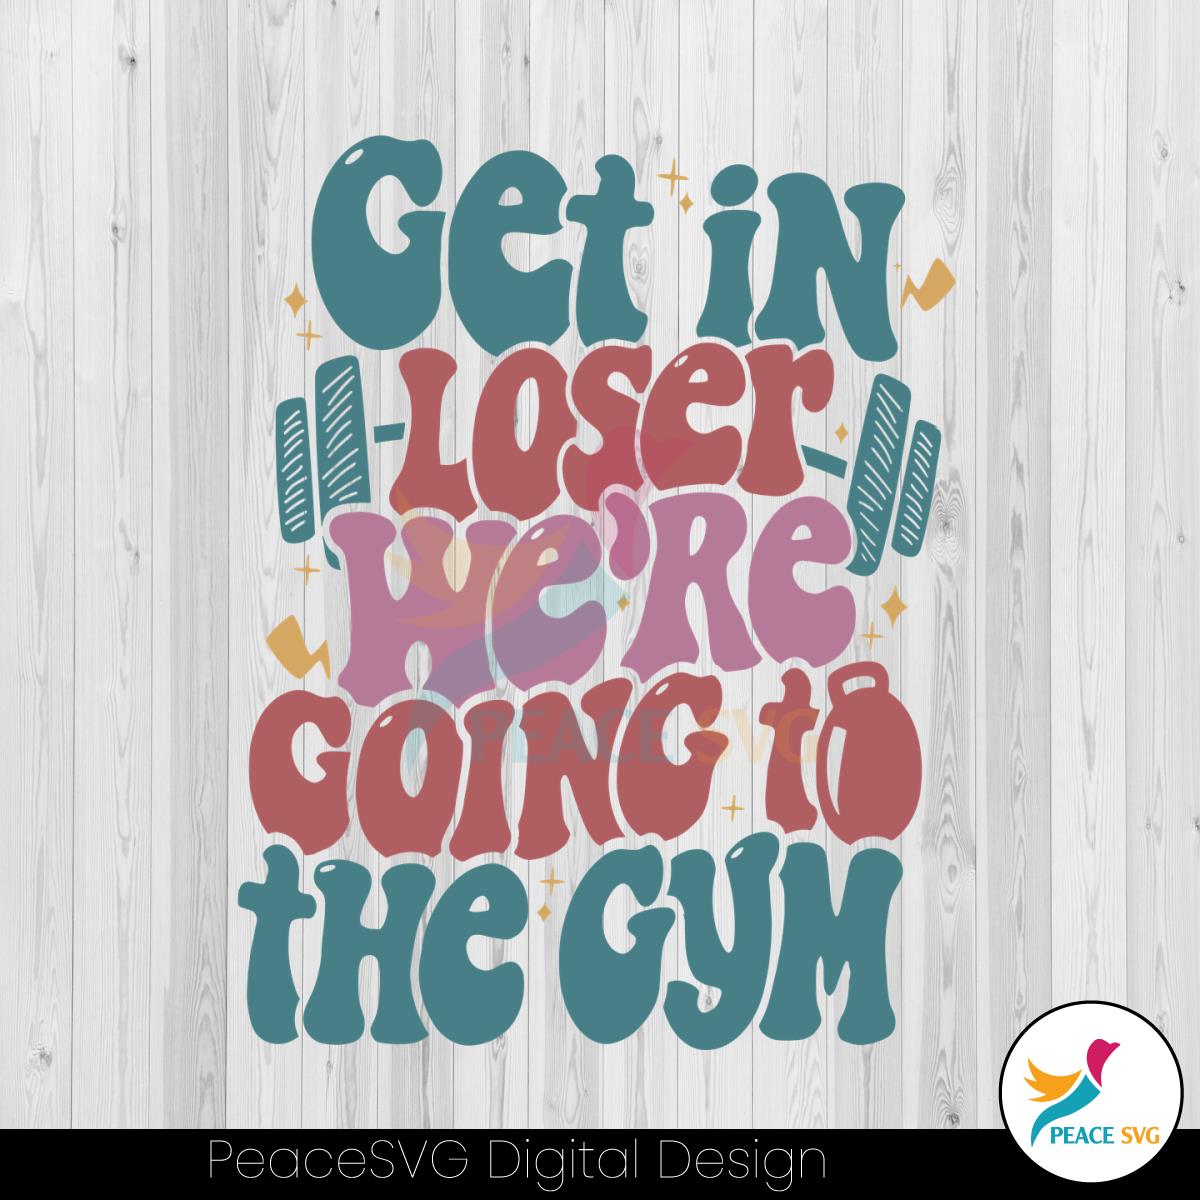 get-in-loser-we-are-going-to-the-gym-svg-digital-cricut-file